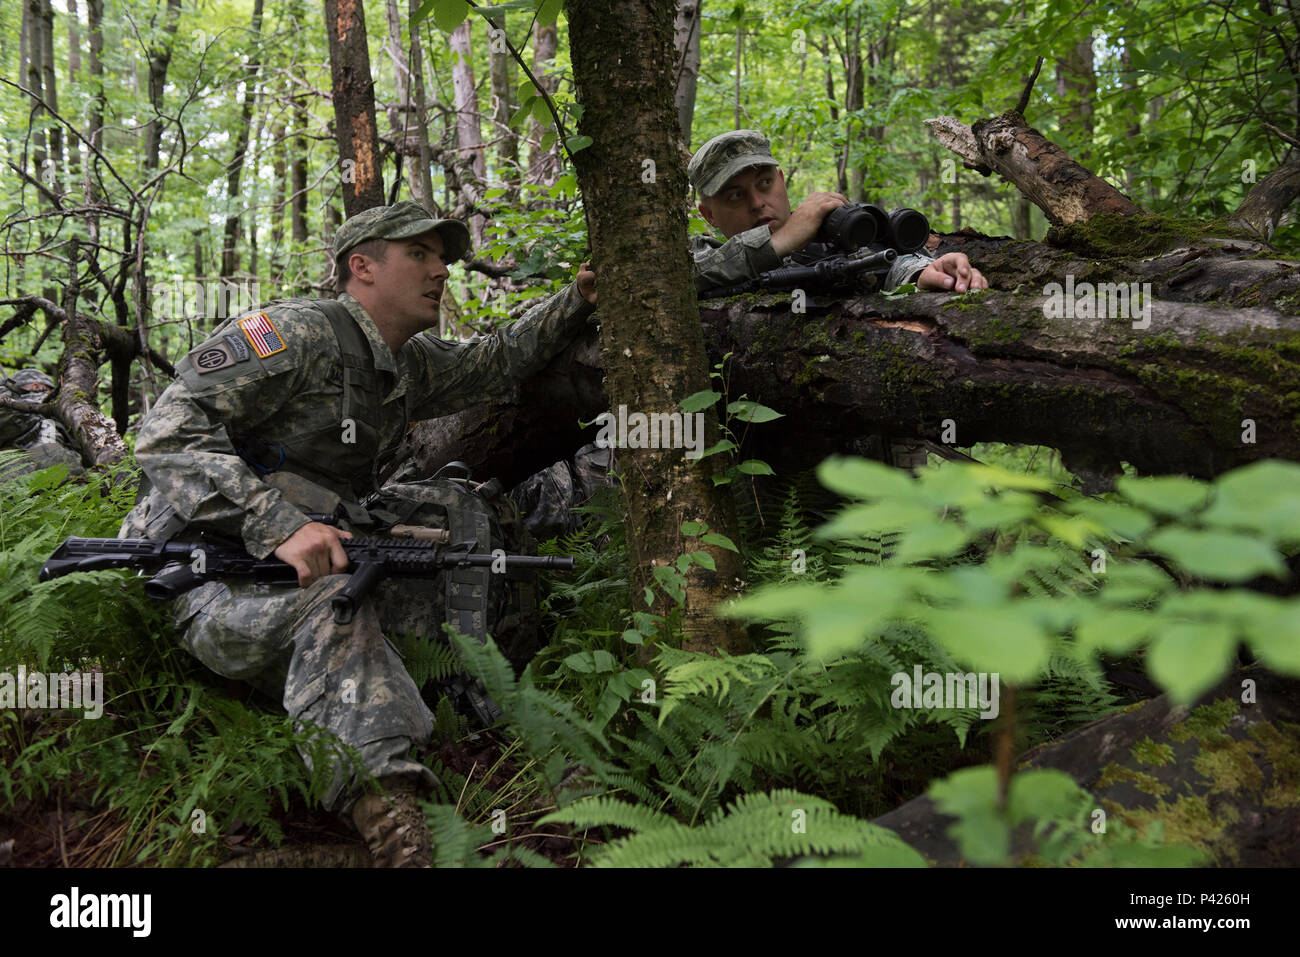 U.S. Army Staff Sgt. Logan Blacklock (left) and Sgt. Graham Skinner, both scouts assigned to Headquarters, Headquarters Company, 3rd Battalion, 172nd Infantry Regiment (Mountain), Vermont National Guard, communicate while monitoring opposition forces during a reconnaissance training mission on Camp Ethan Allen Training Site, Jericho, Vt., June 6, 2016. Multiple companies from the 86th Infantry Brigade Combat Team are participating in multiple training events over the course of the next two weeks as part of their annual training. (U.S. Air National Guard photo by Tech. Sgt. Sarah Mattison/Relea Stock Photo